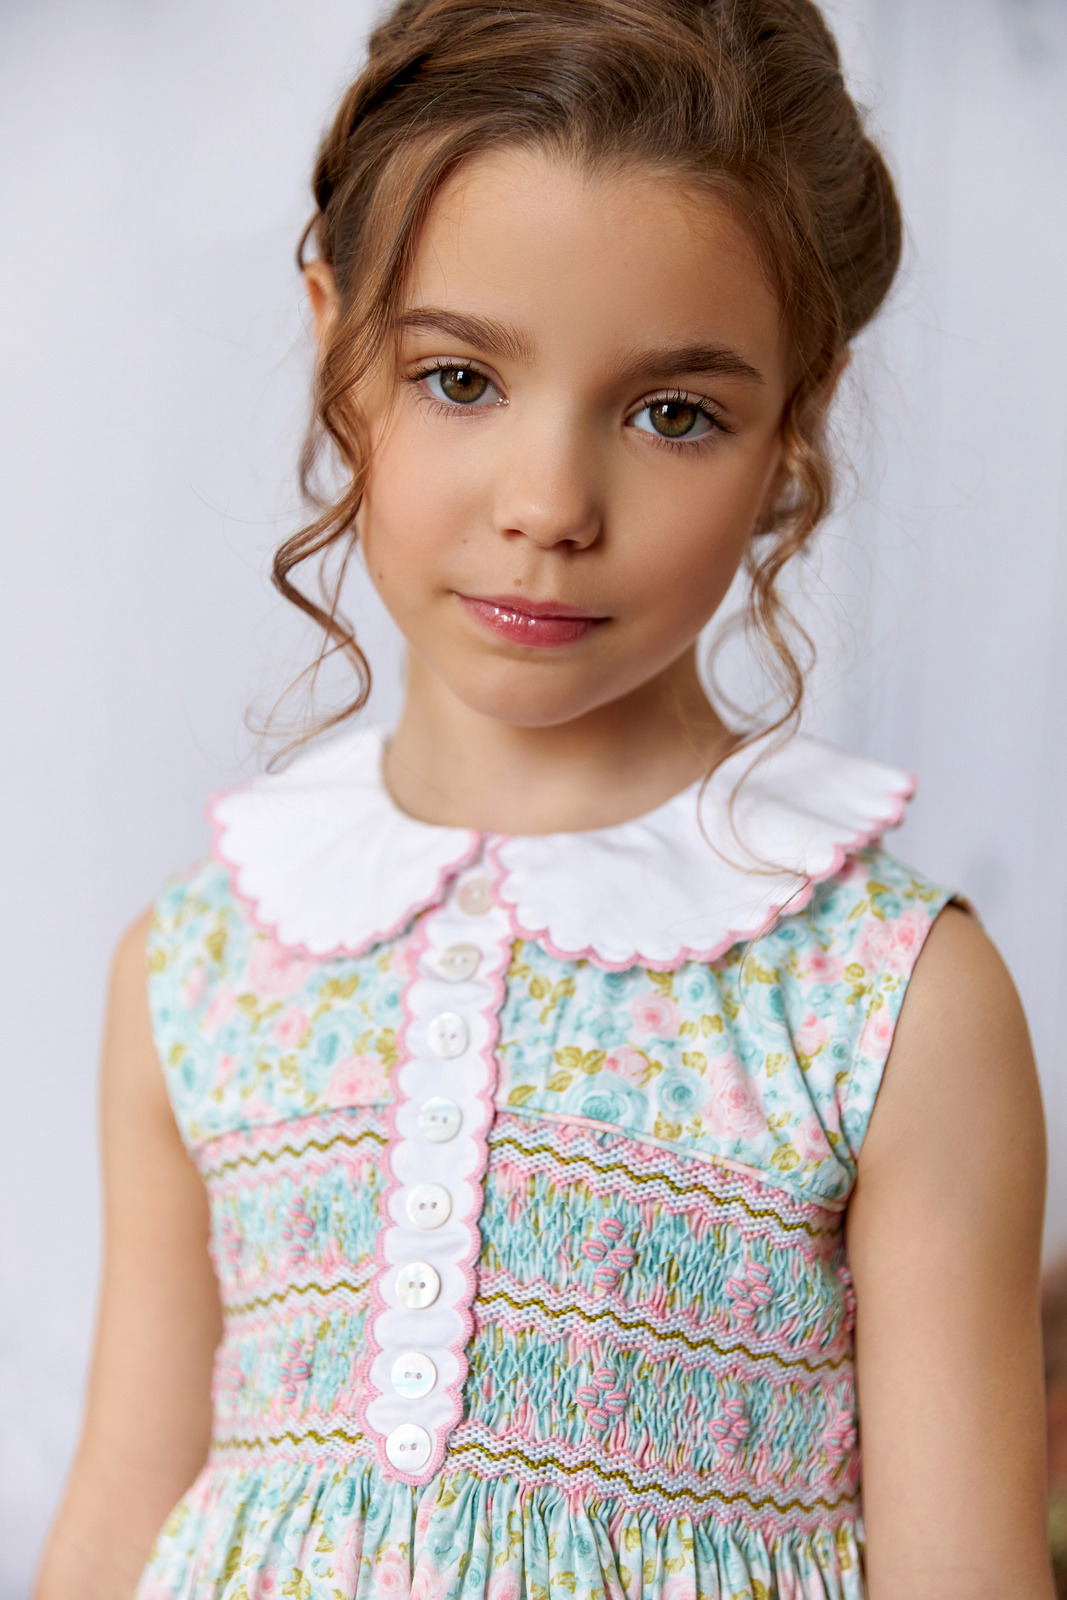 ** SOLD OUT ** The hand smocked FLORENCE dress - Floral